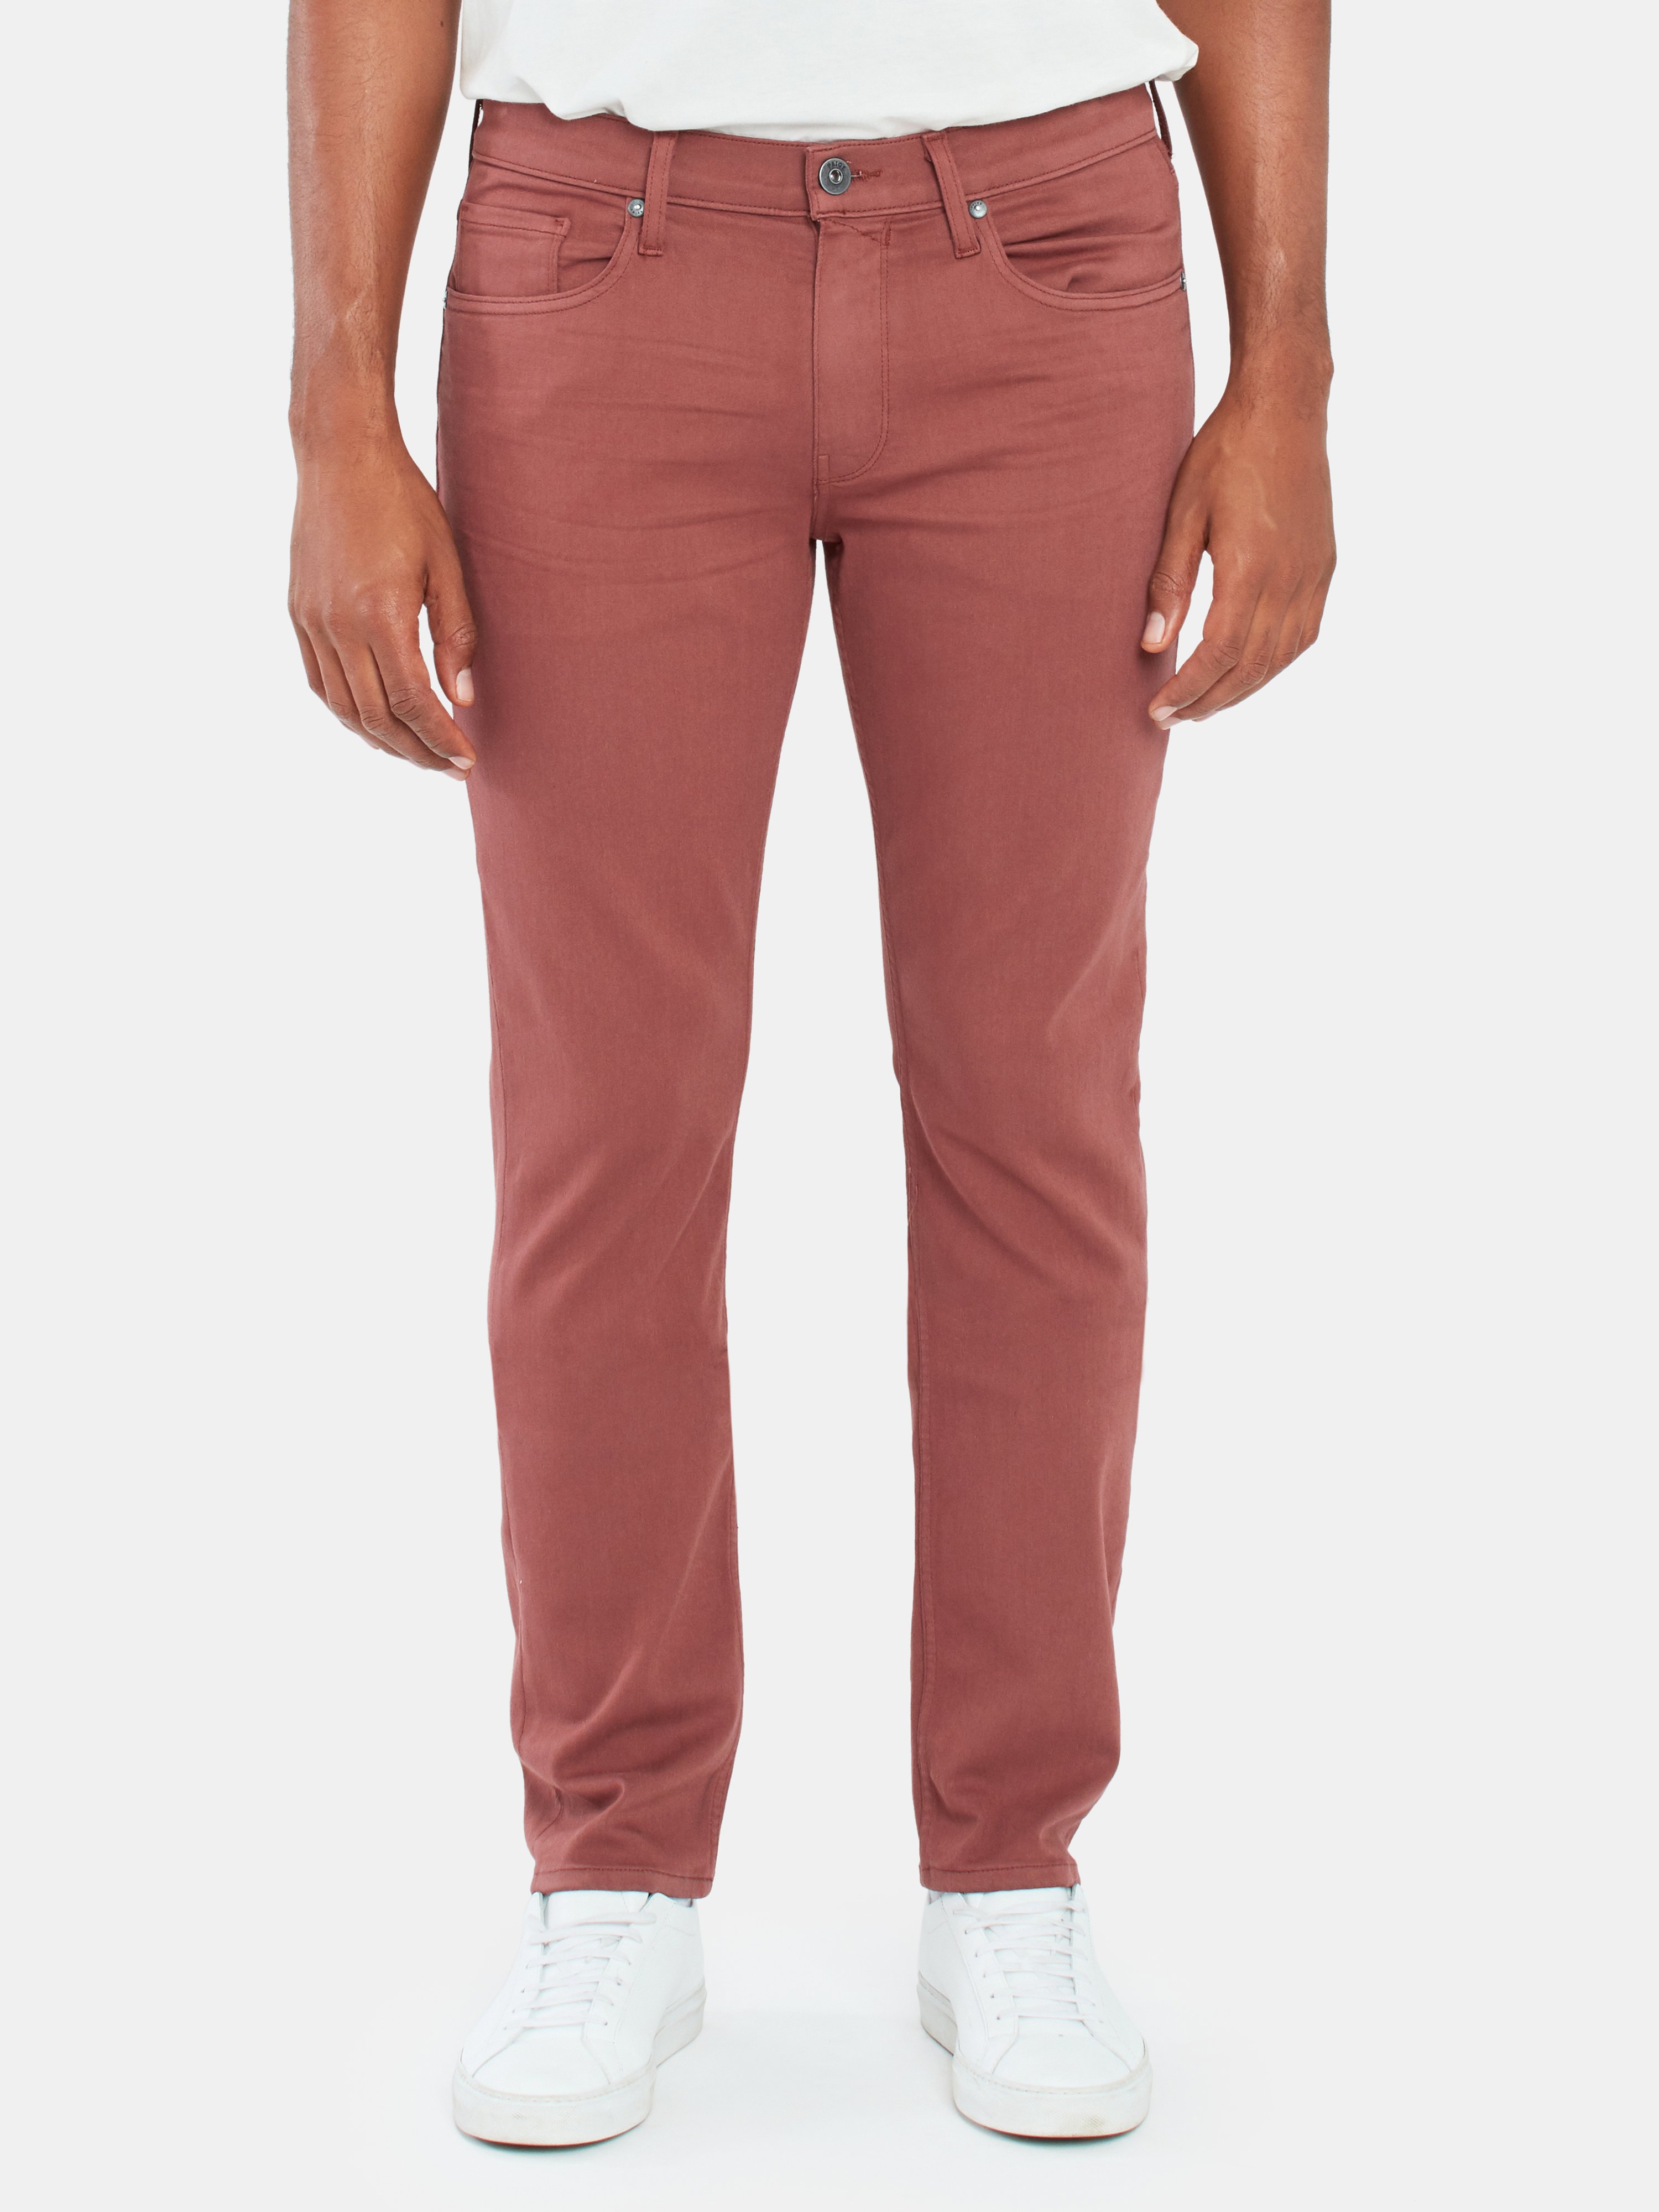 Paige Federal Slim Straight Jeans In Dusted Rose